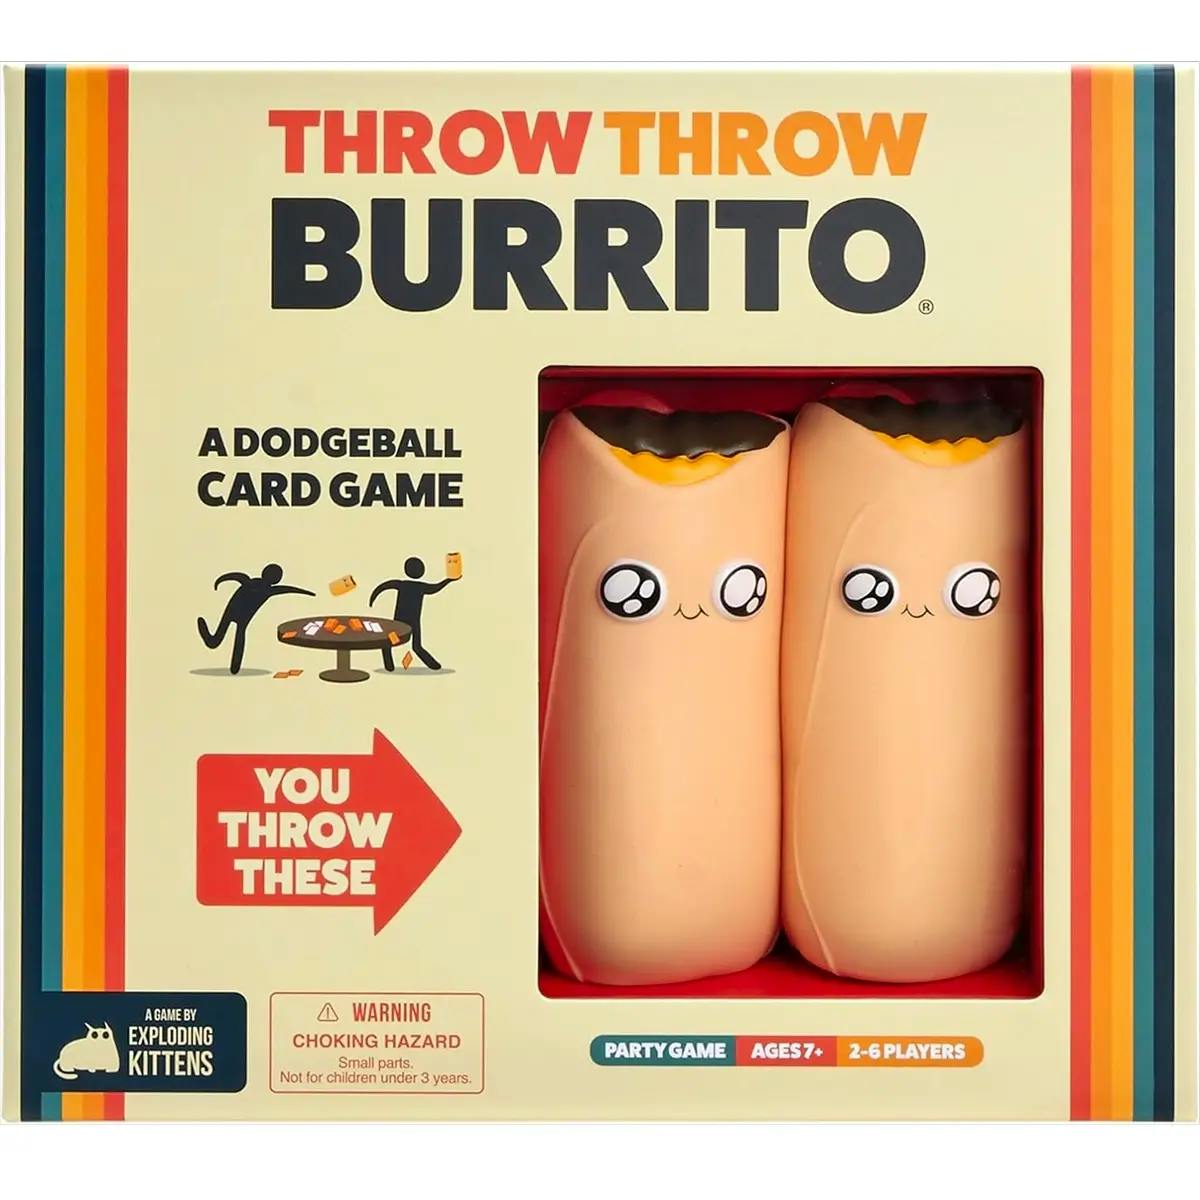 Front of box for Throw Throw Burrito game.